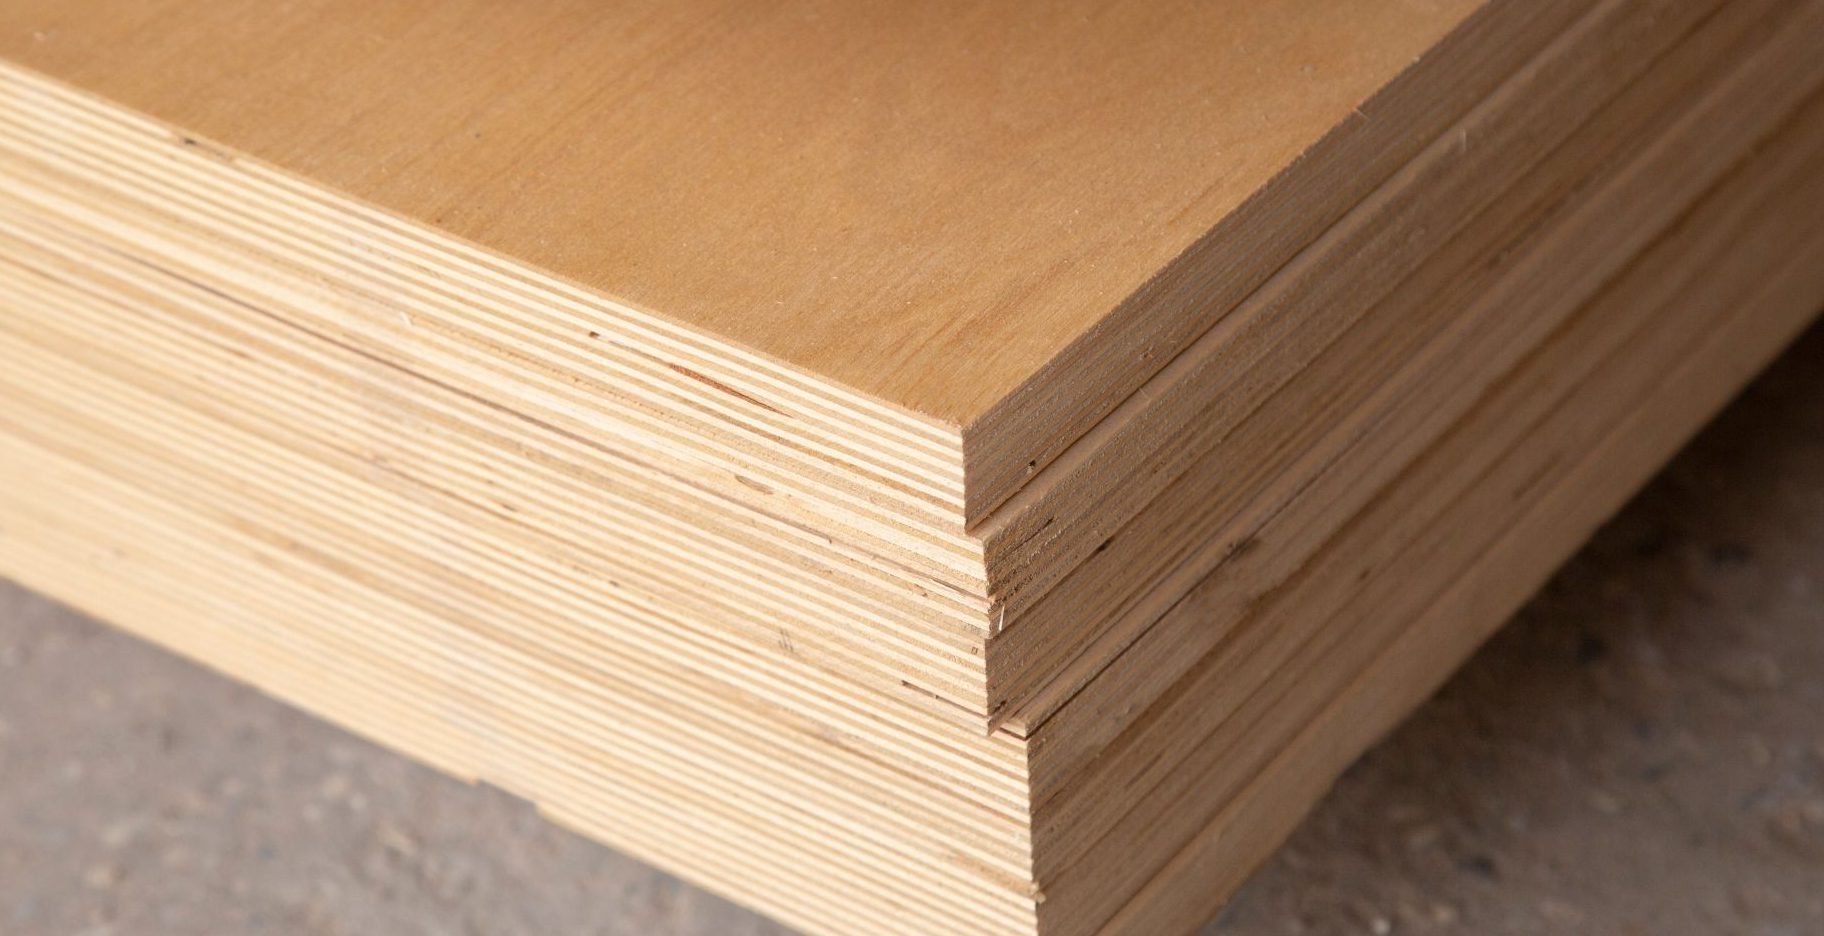 Global Marine Plywood Market Overview And Prospects – Includes Marine Plywood Market Size